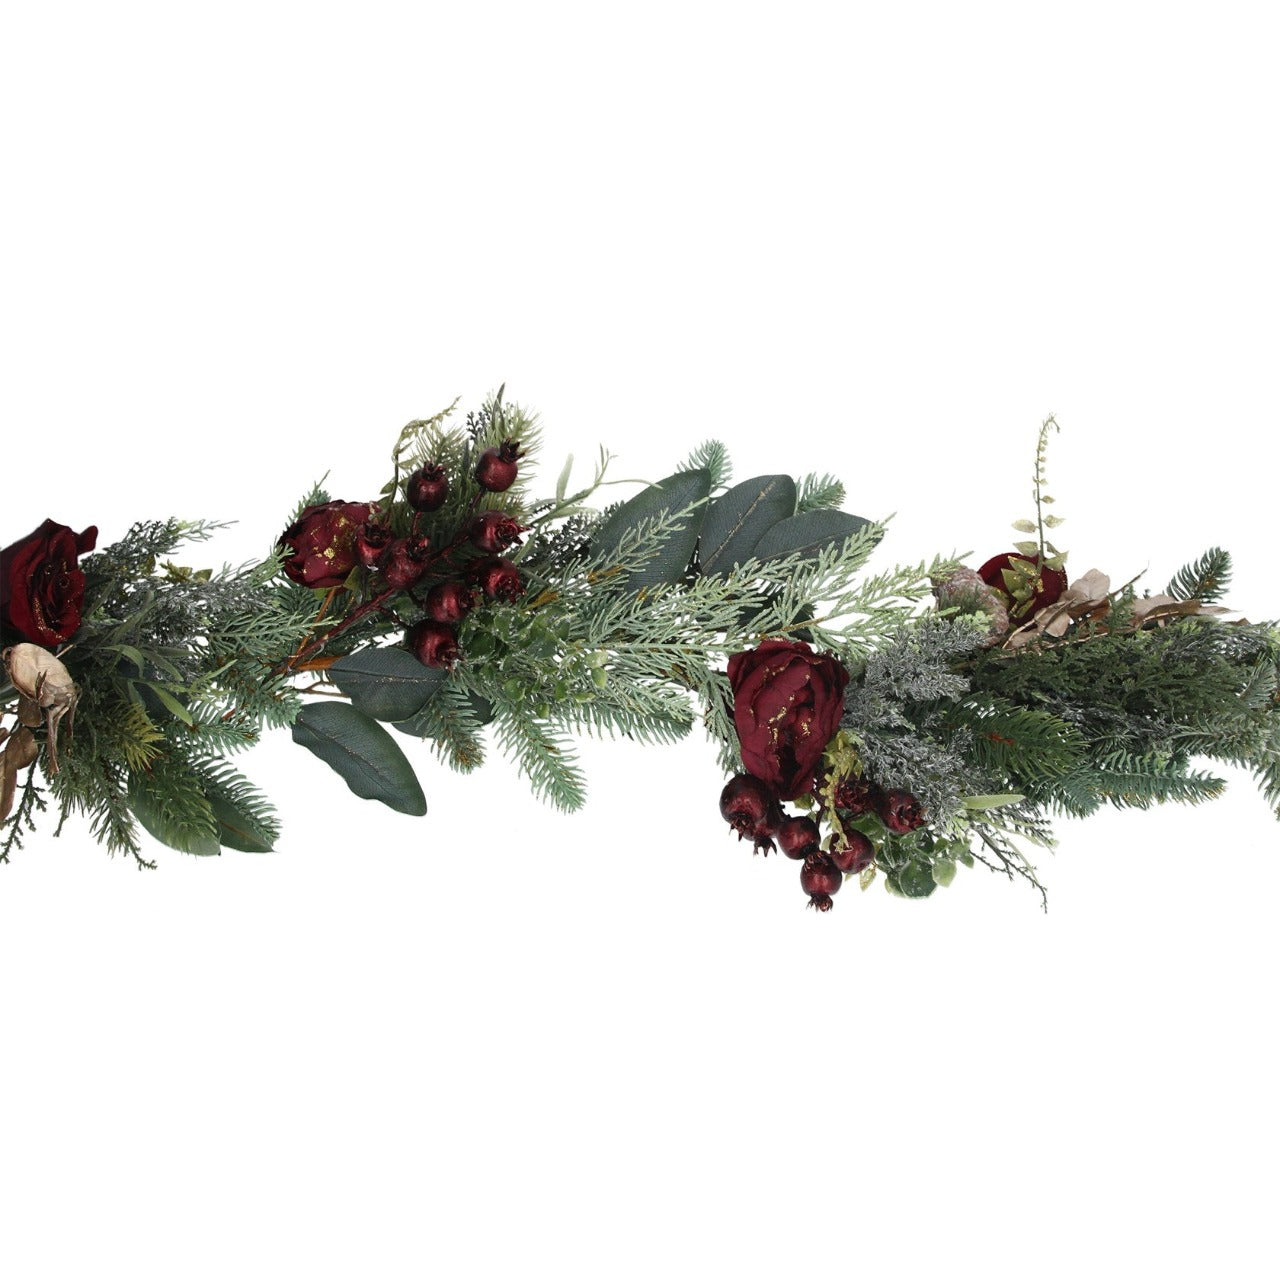 Gisela Graham Mixed Green Leaf Red Rose Garland  Featuring faux fir and leaves aplenty, this Christmas tree garland is embellished with soft fabric green leaf and red roses detailing. It’s perfect for creating a traditional festive feel in your home.